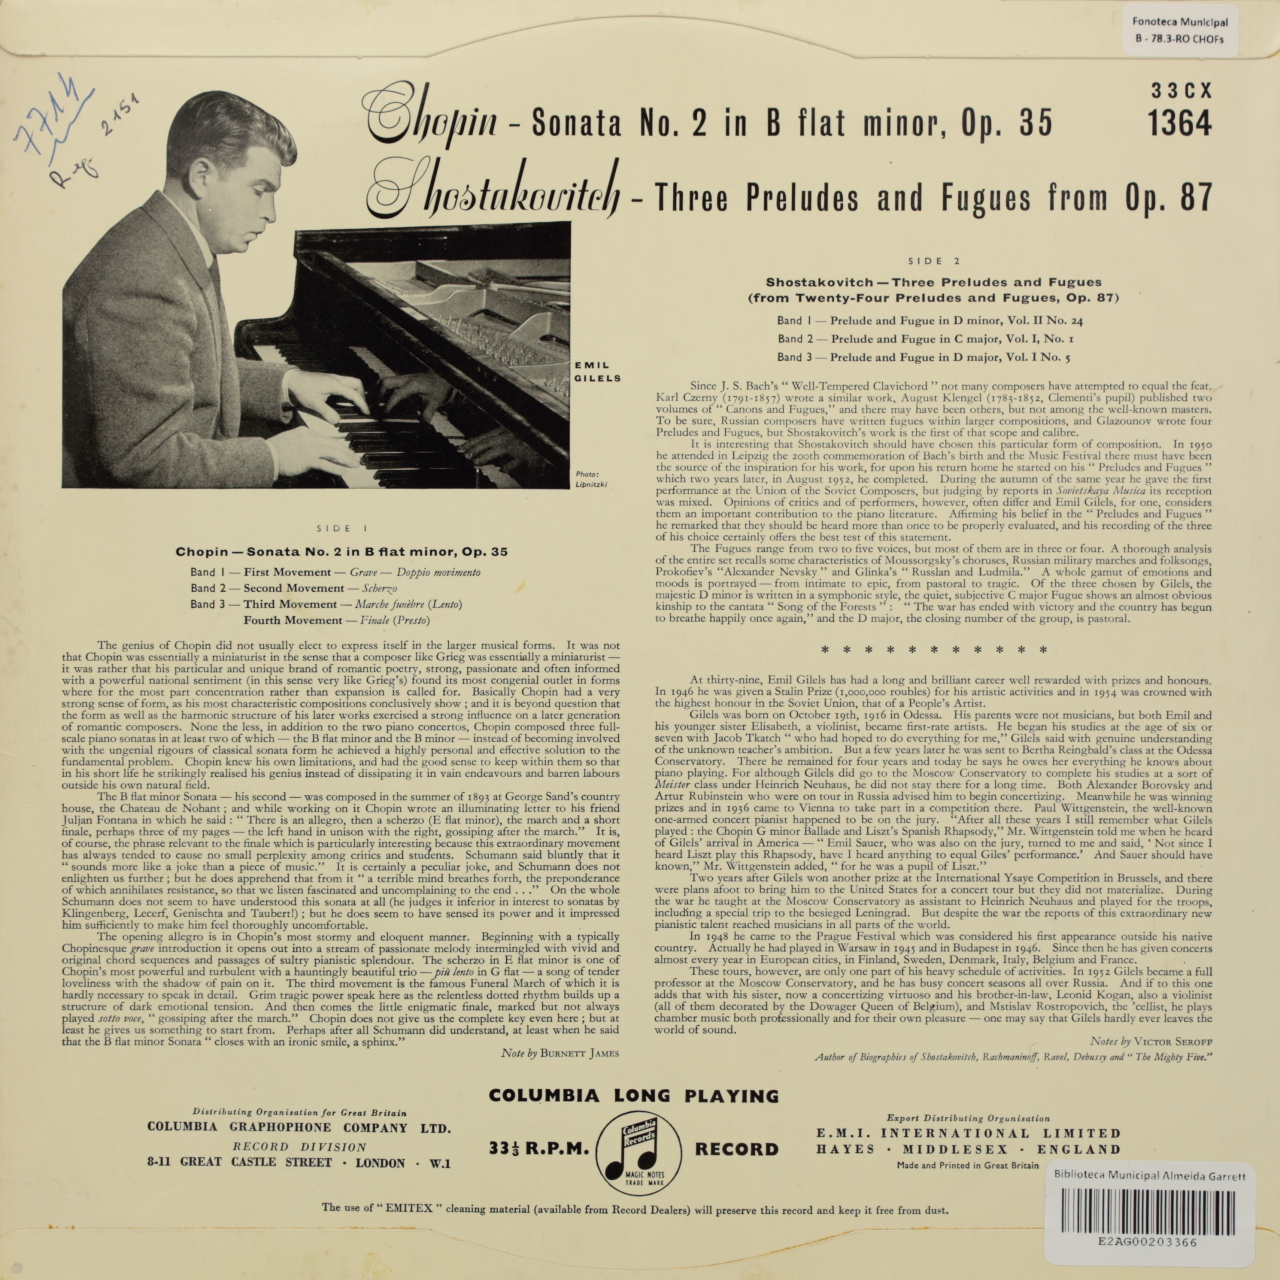 Chopin: Sonata nº2 / Shostakovich: Three preludes and fugues from Op. 87